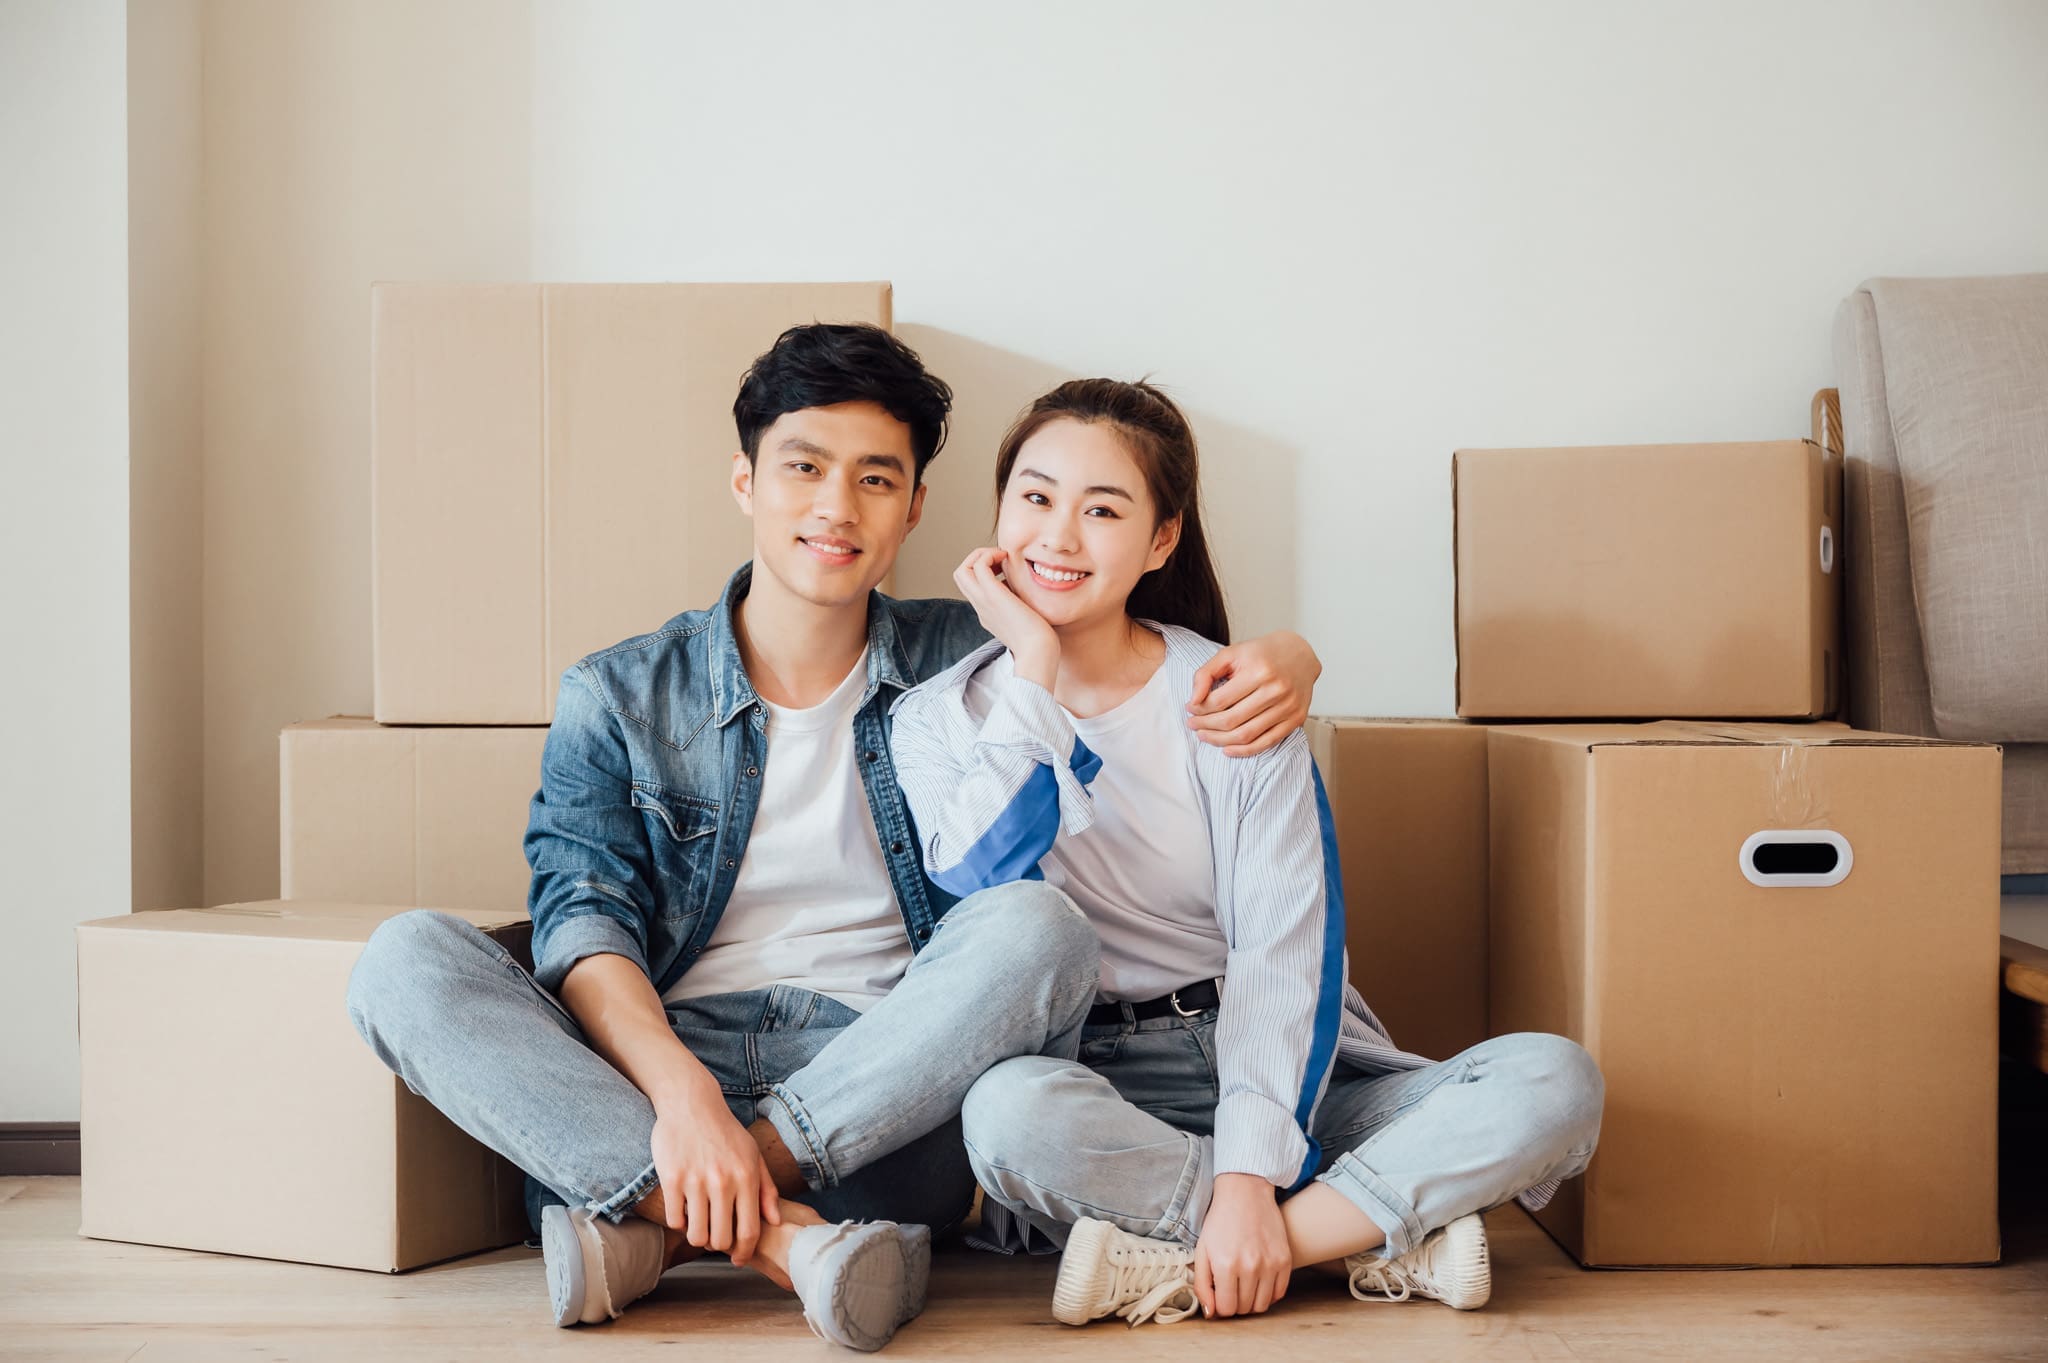 7 reasons to fall in love with moving